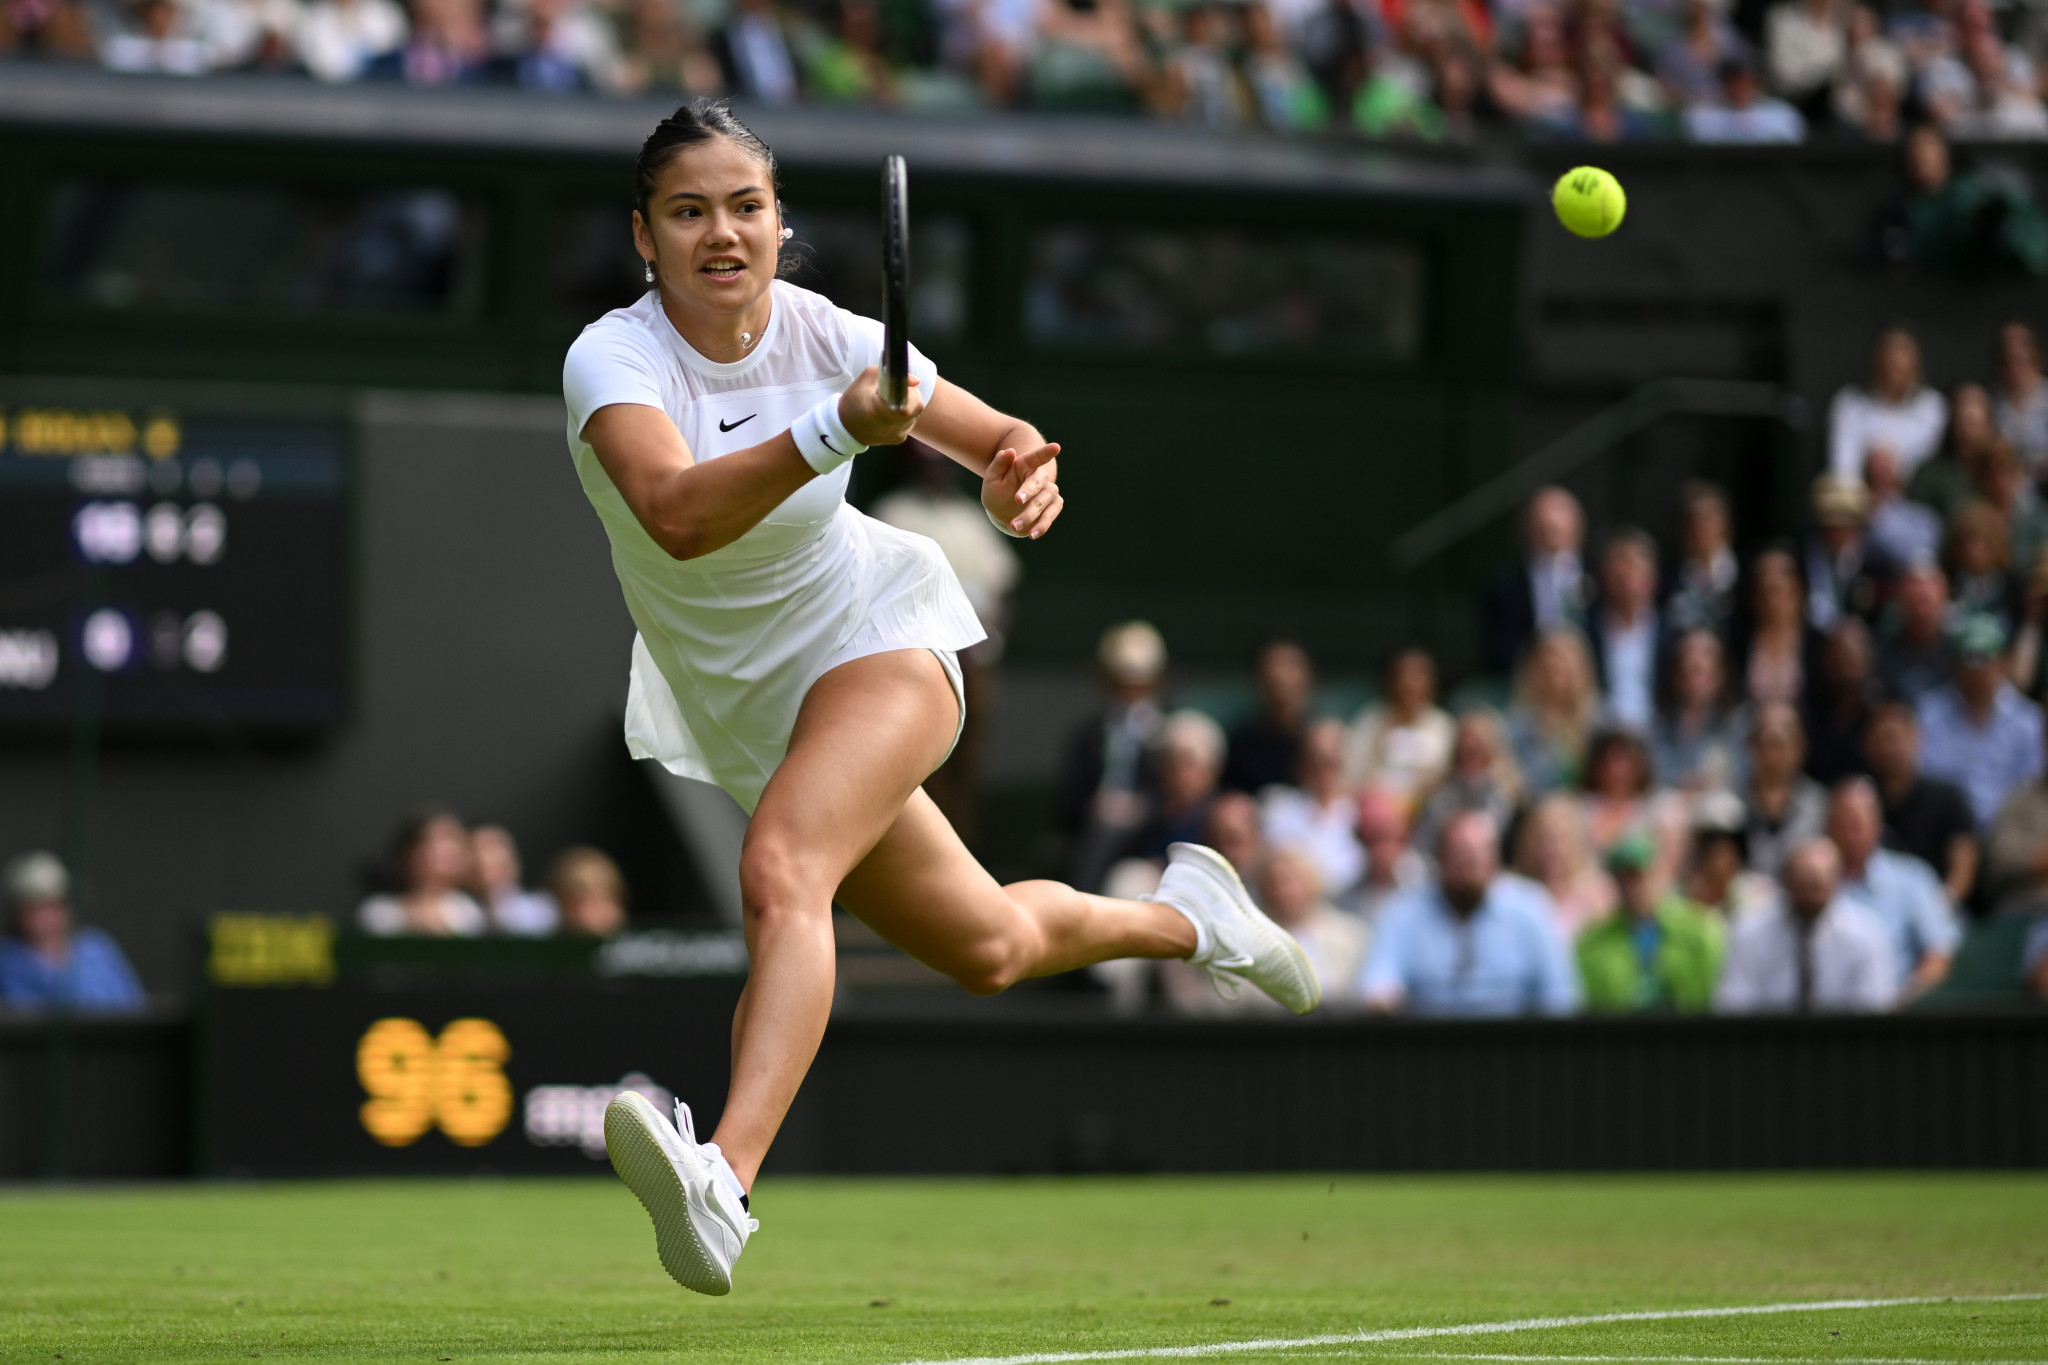 Britain's Emma Raducanu exited this year's Wimbledon in the second round but fans at the Grand Slam have plenty to look forward to ©Getty Images 